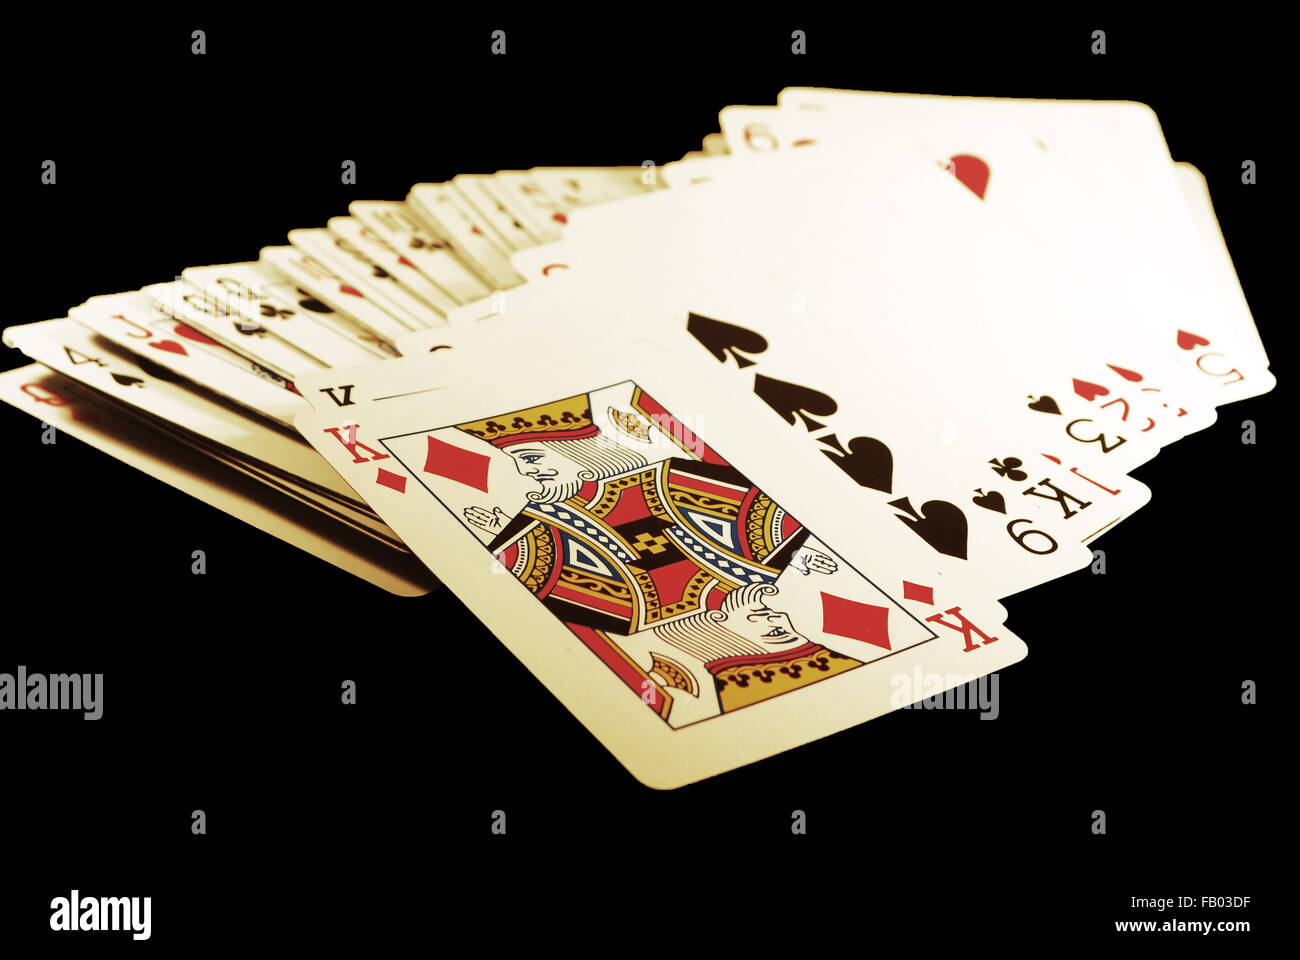 cards,gambling,deck of cards,king,king of diamonds,card games Stock Photo